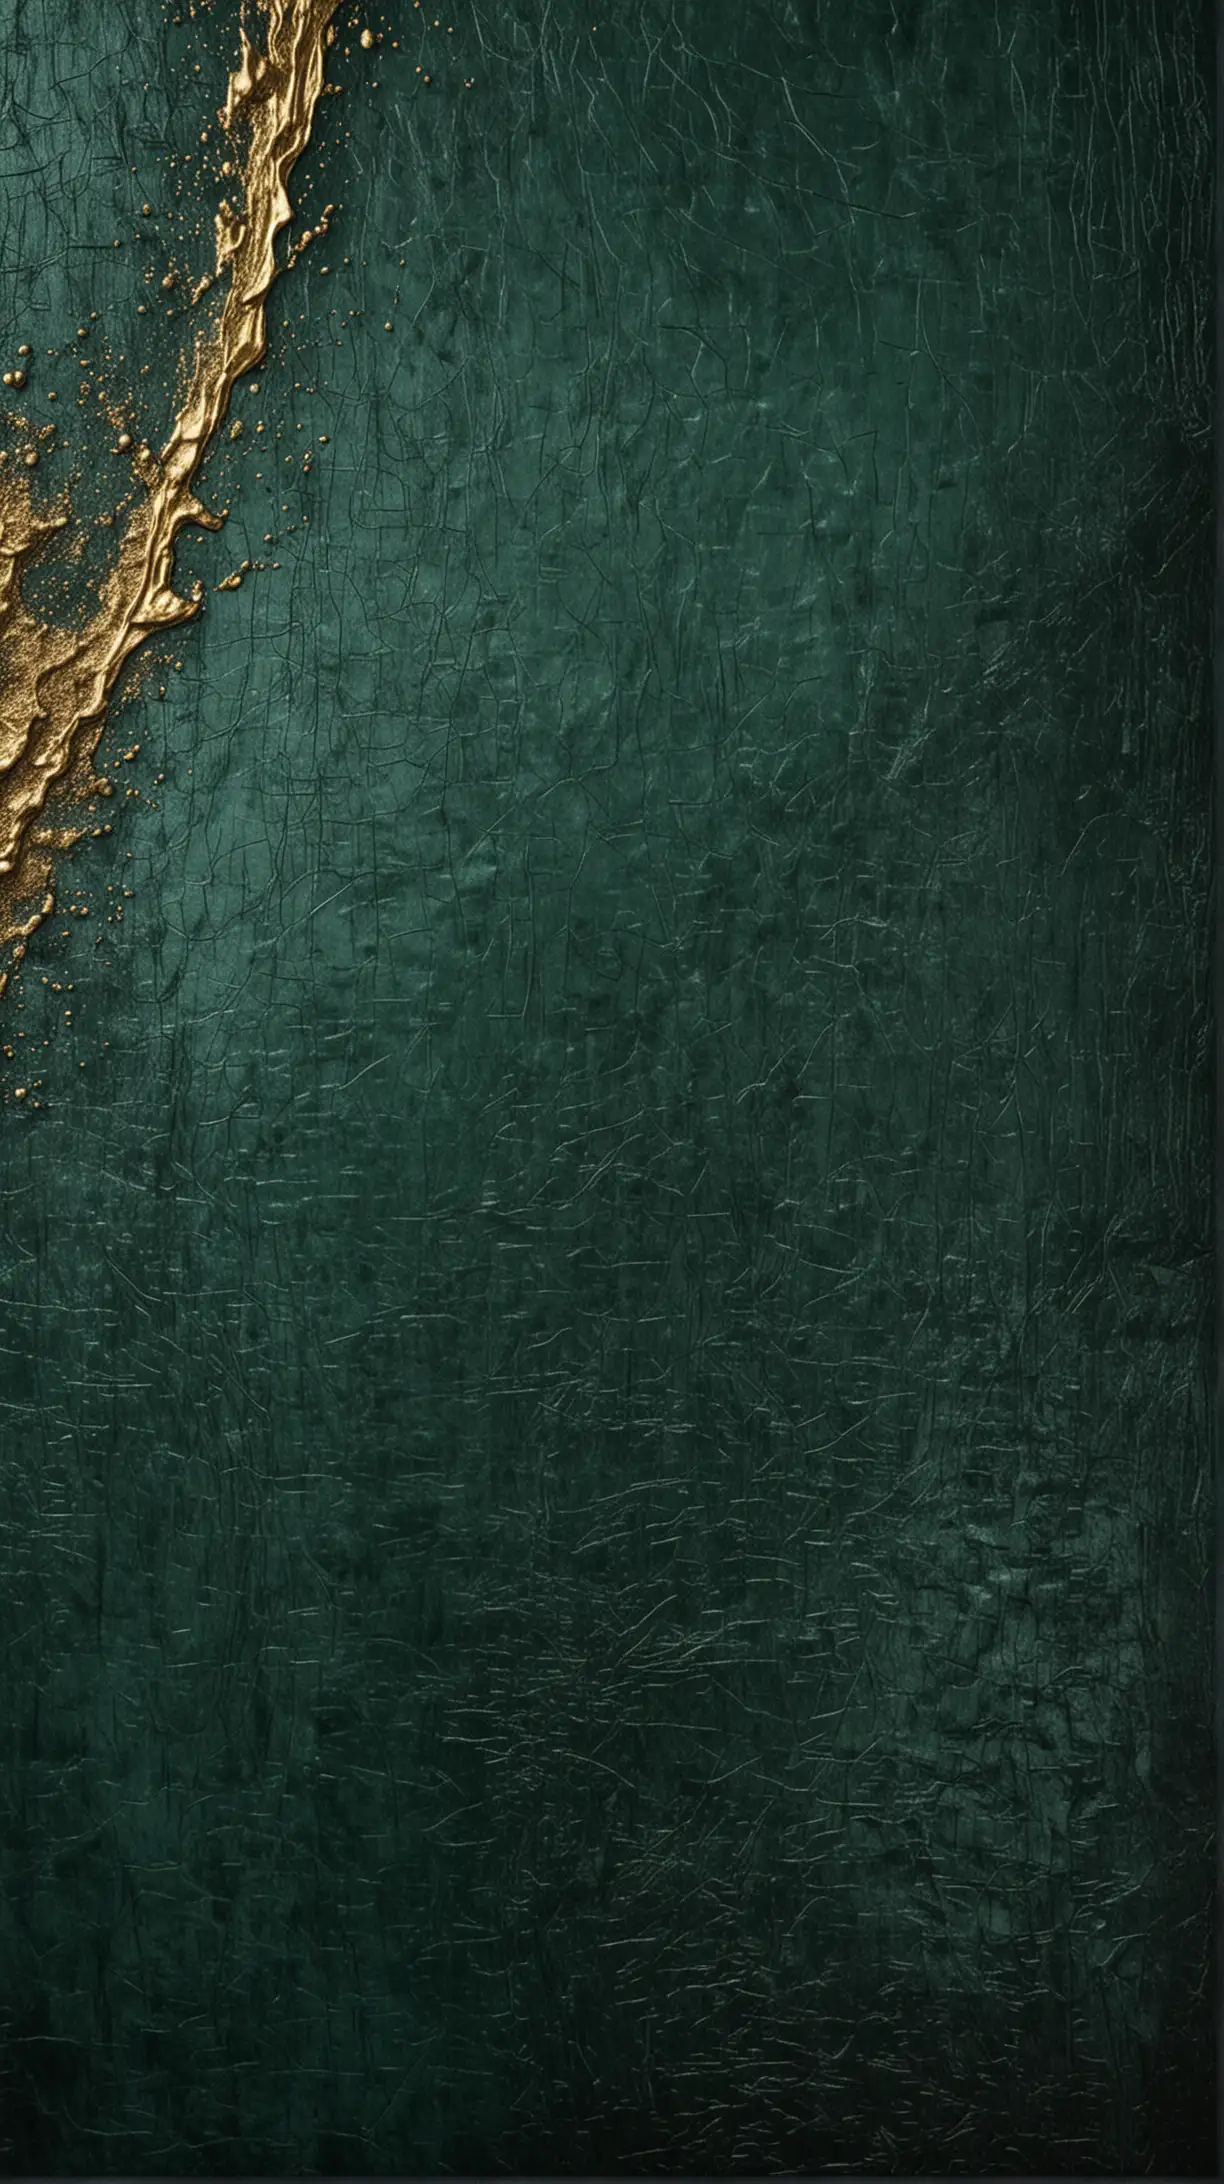 artistic fine art style textures with  emerald color metallic textured base with dark gold coming through in area with monochrome background with slightly darker edges